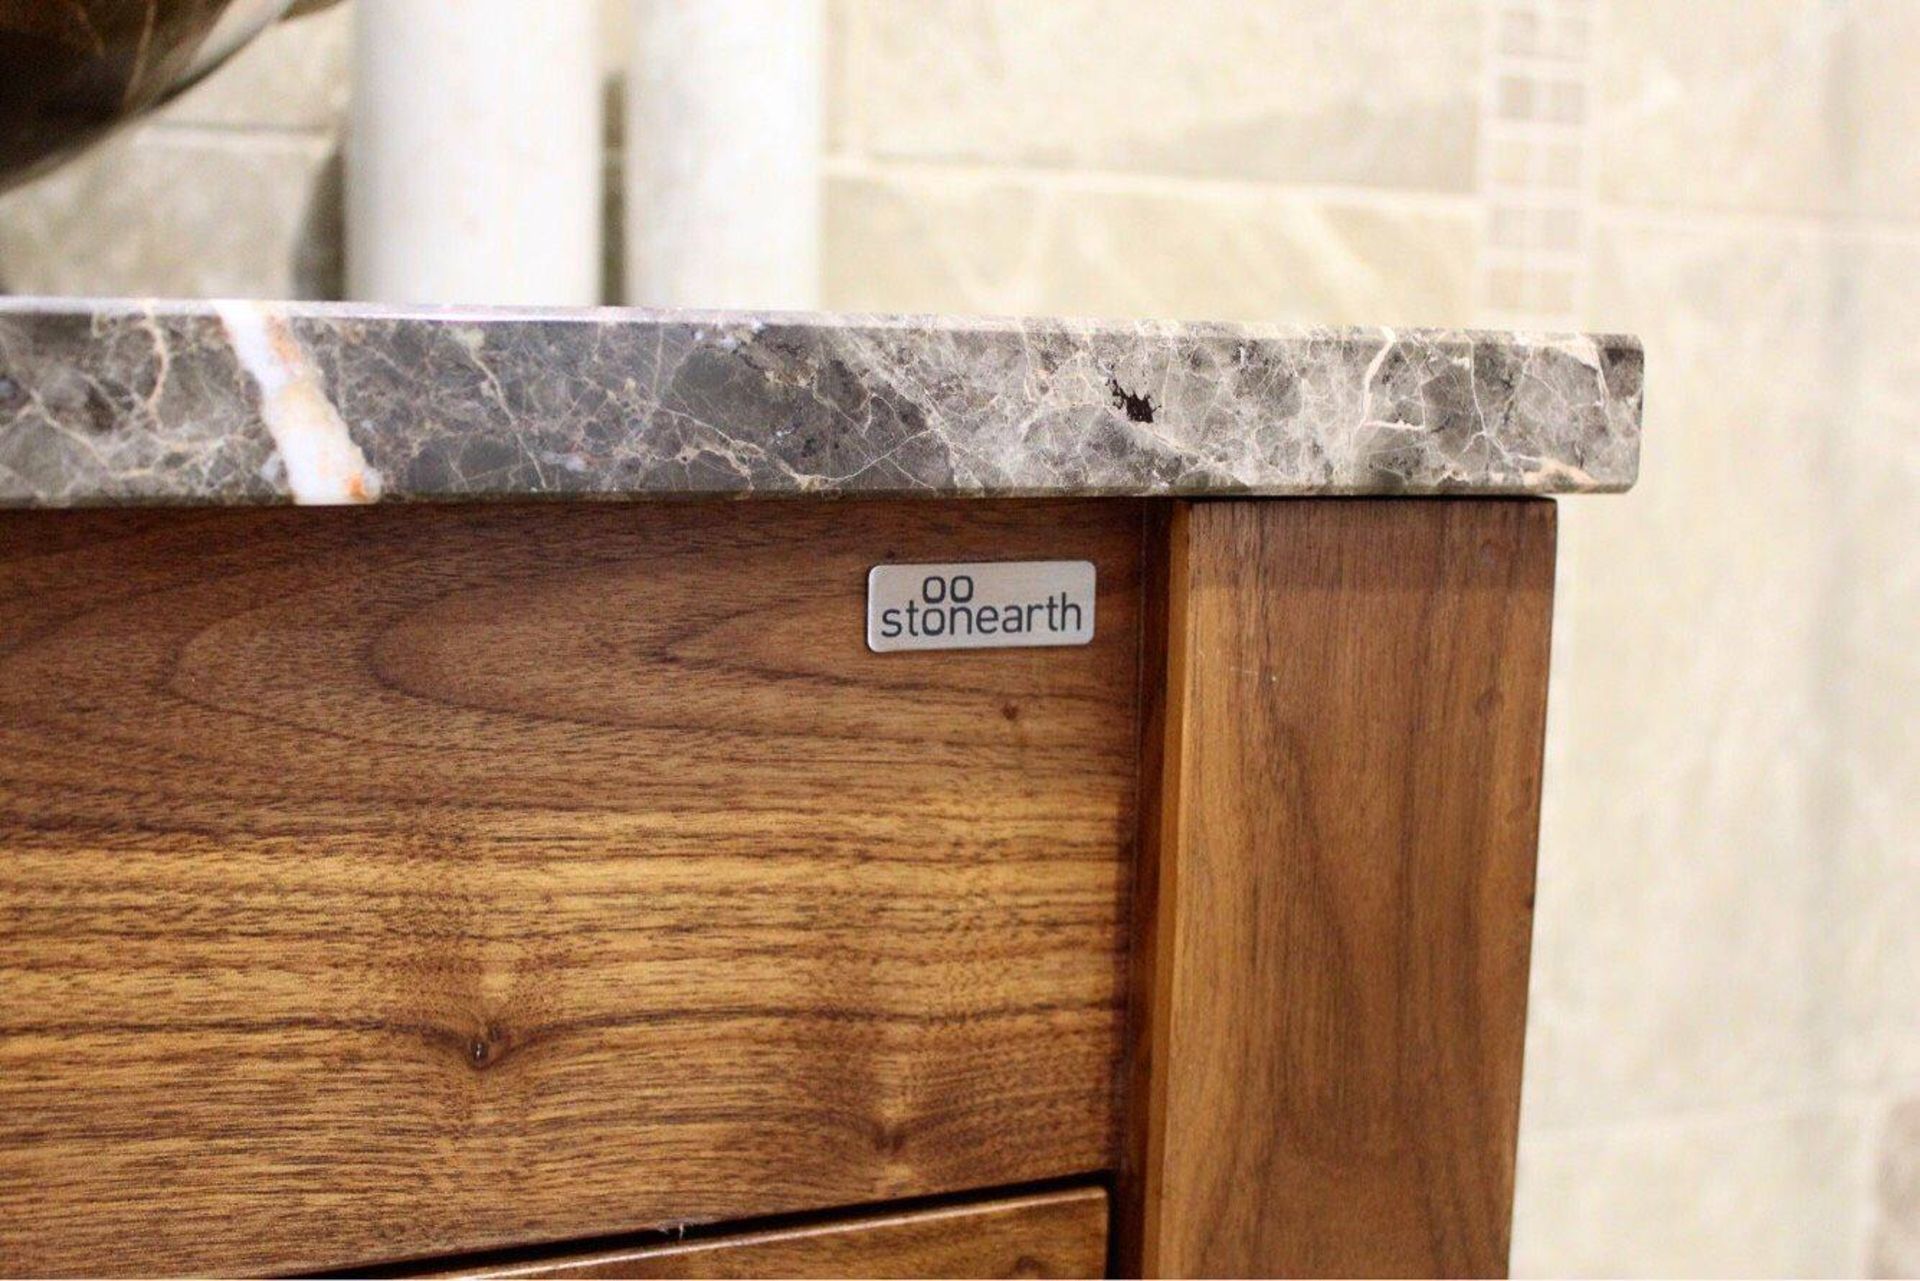 1 x Stonearth 'Finesse' Countertop Washstand - American Solid Walnut - Original RRP £1,400 - Image 3 of 10